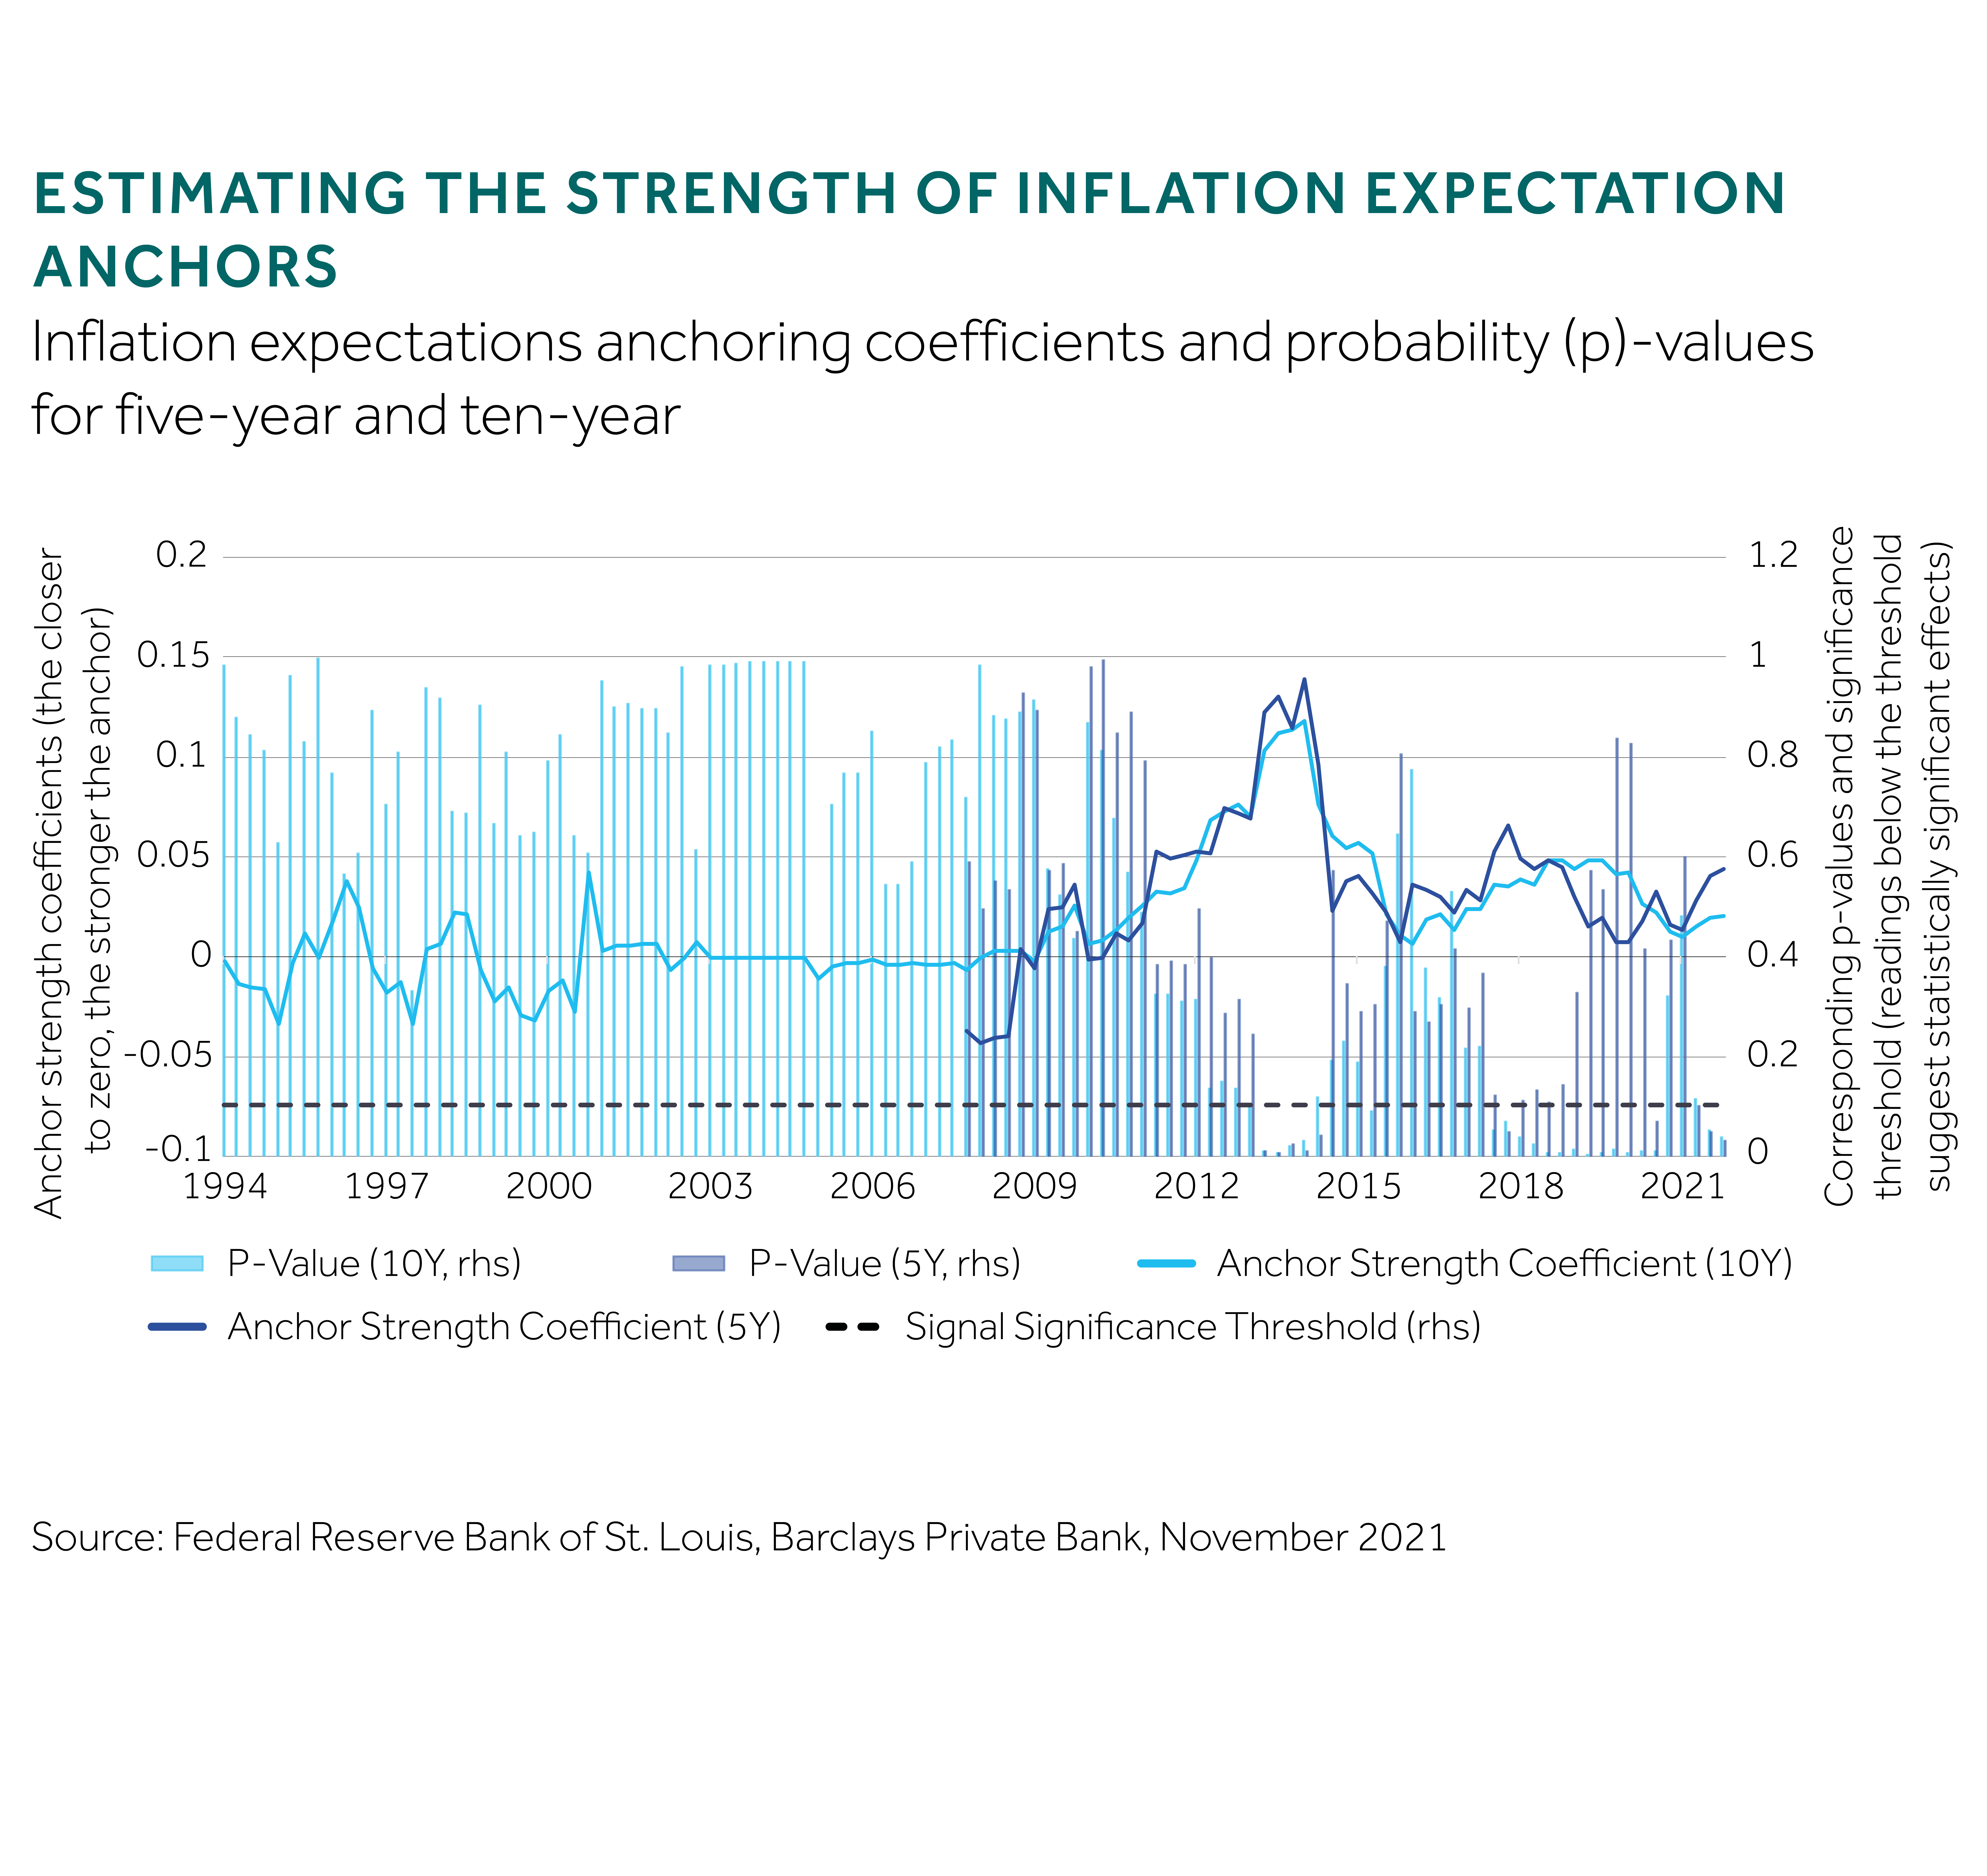 chart: inflation expectations anchoring coefficients and probabilit (p)-values for five-year and ten-year